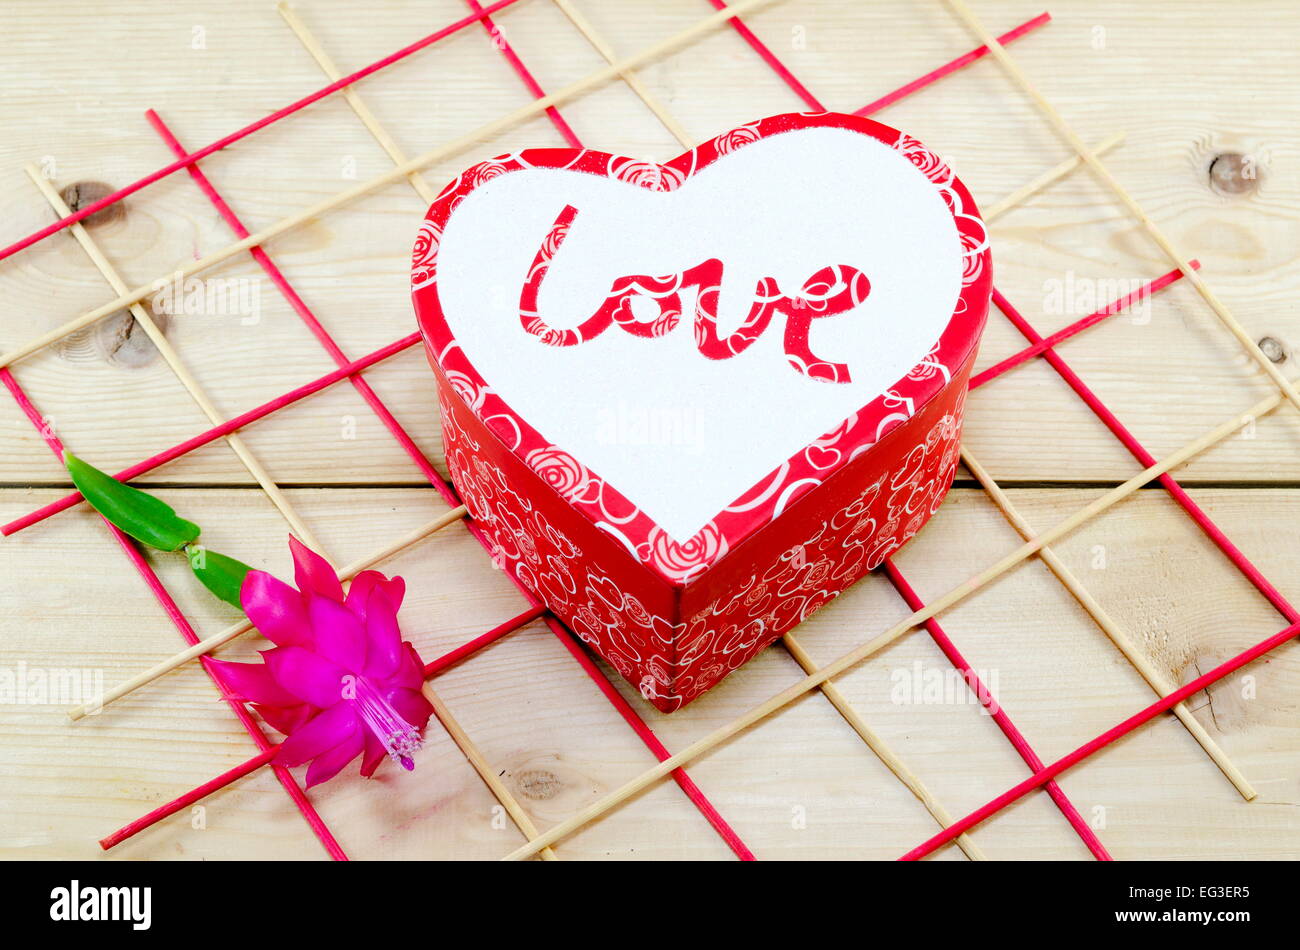 Heart shaped box decorated with a pink flower on a wooden table Stock Photo